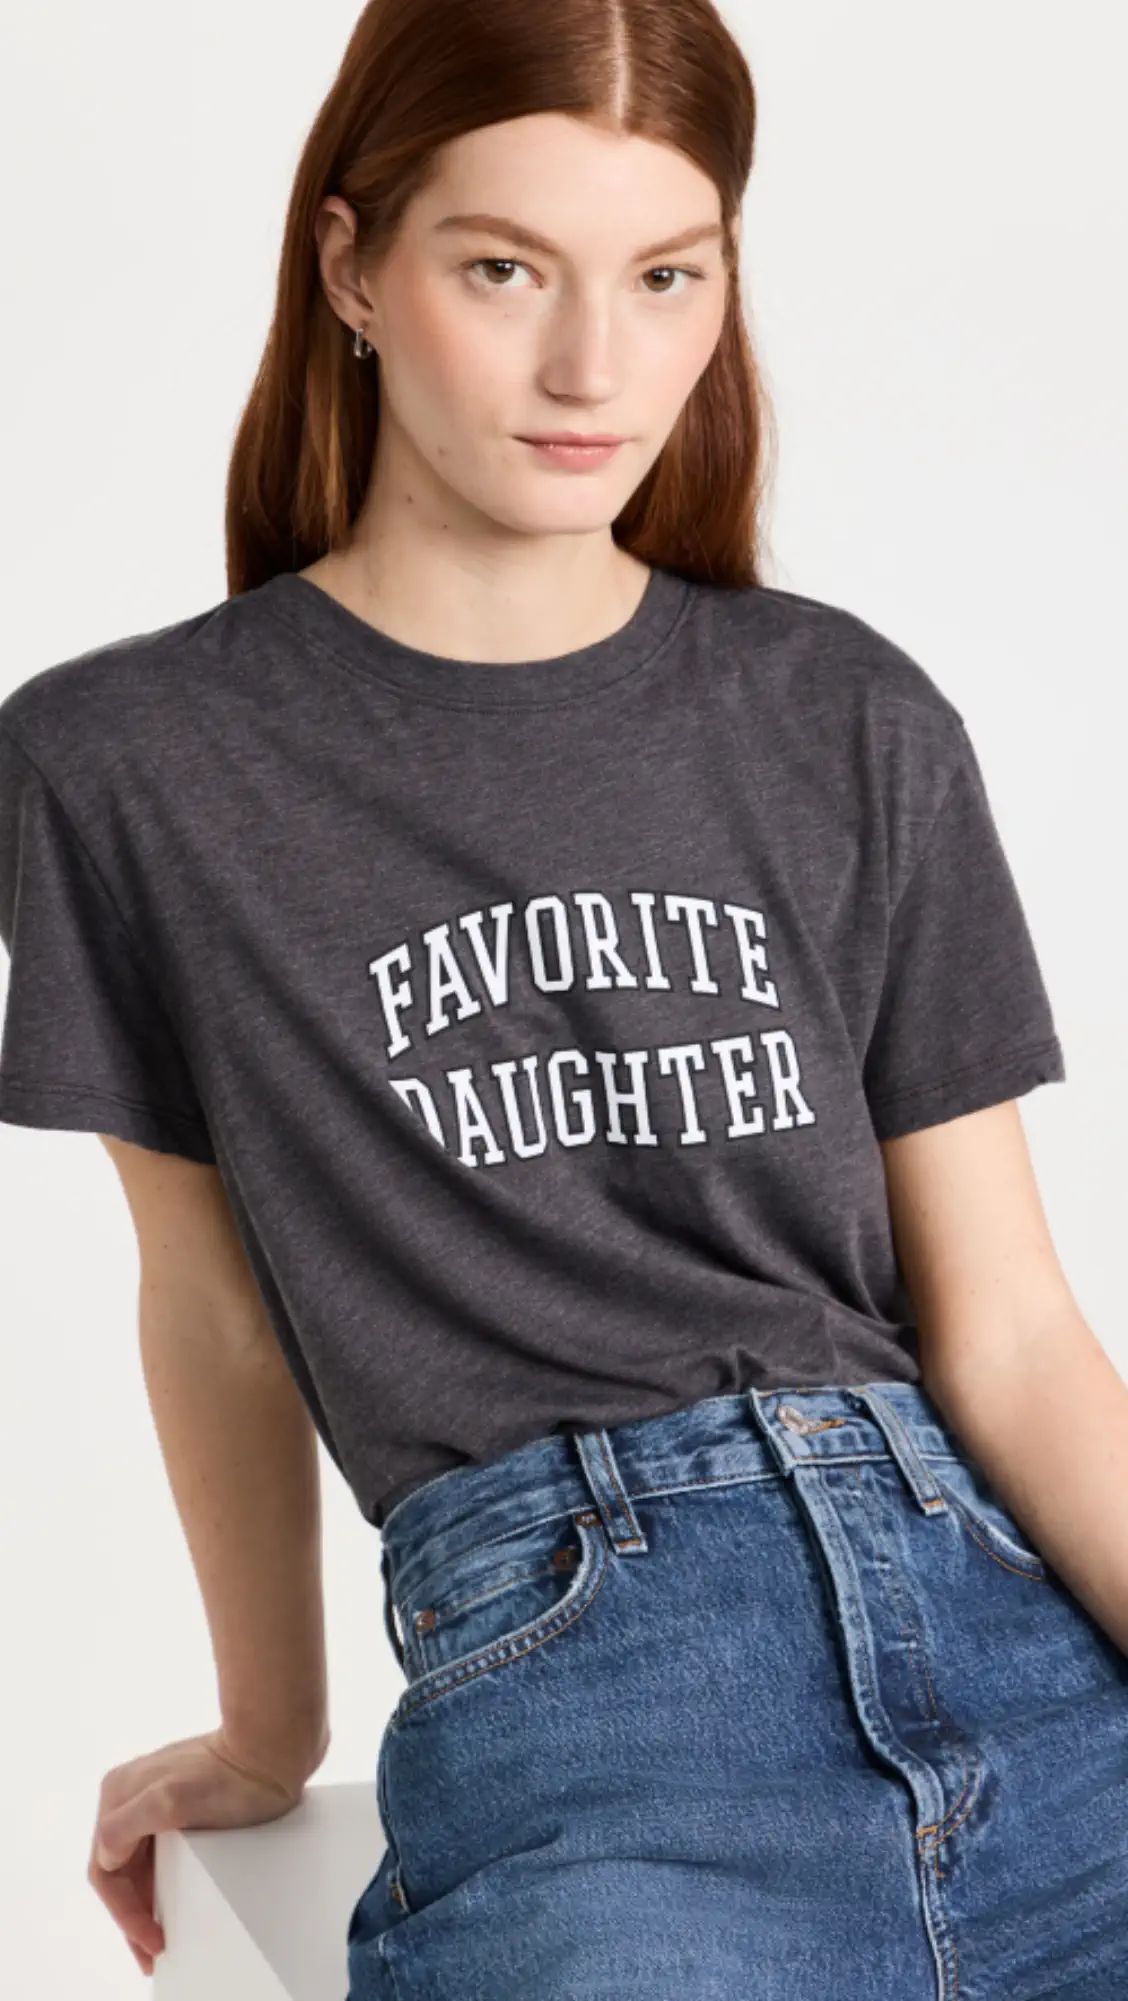 The Favorite Daughter Cropped Collegiate | Shopbop